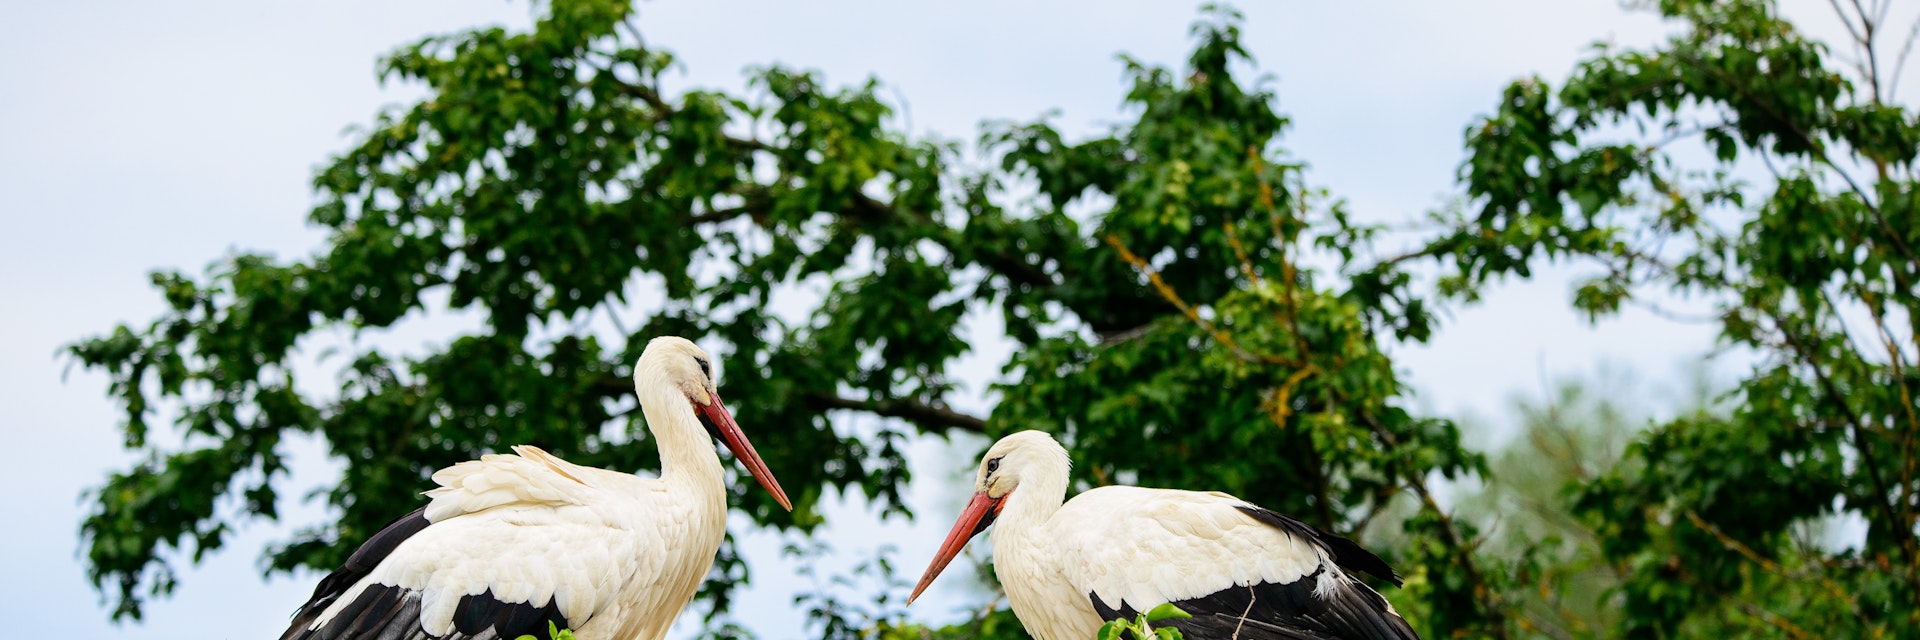 White herons in Naturoparc.